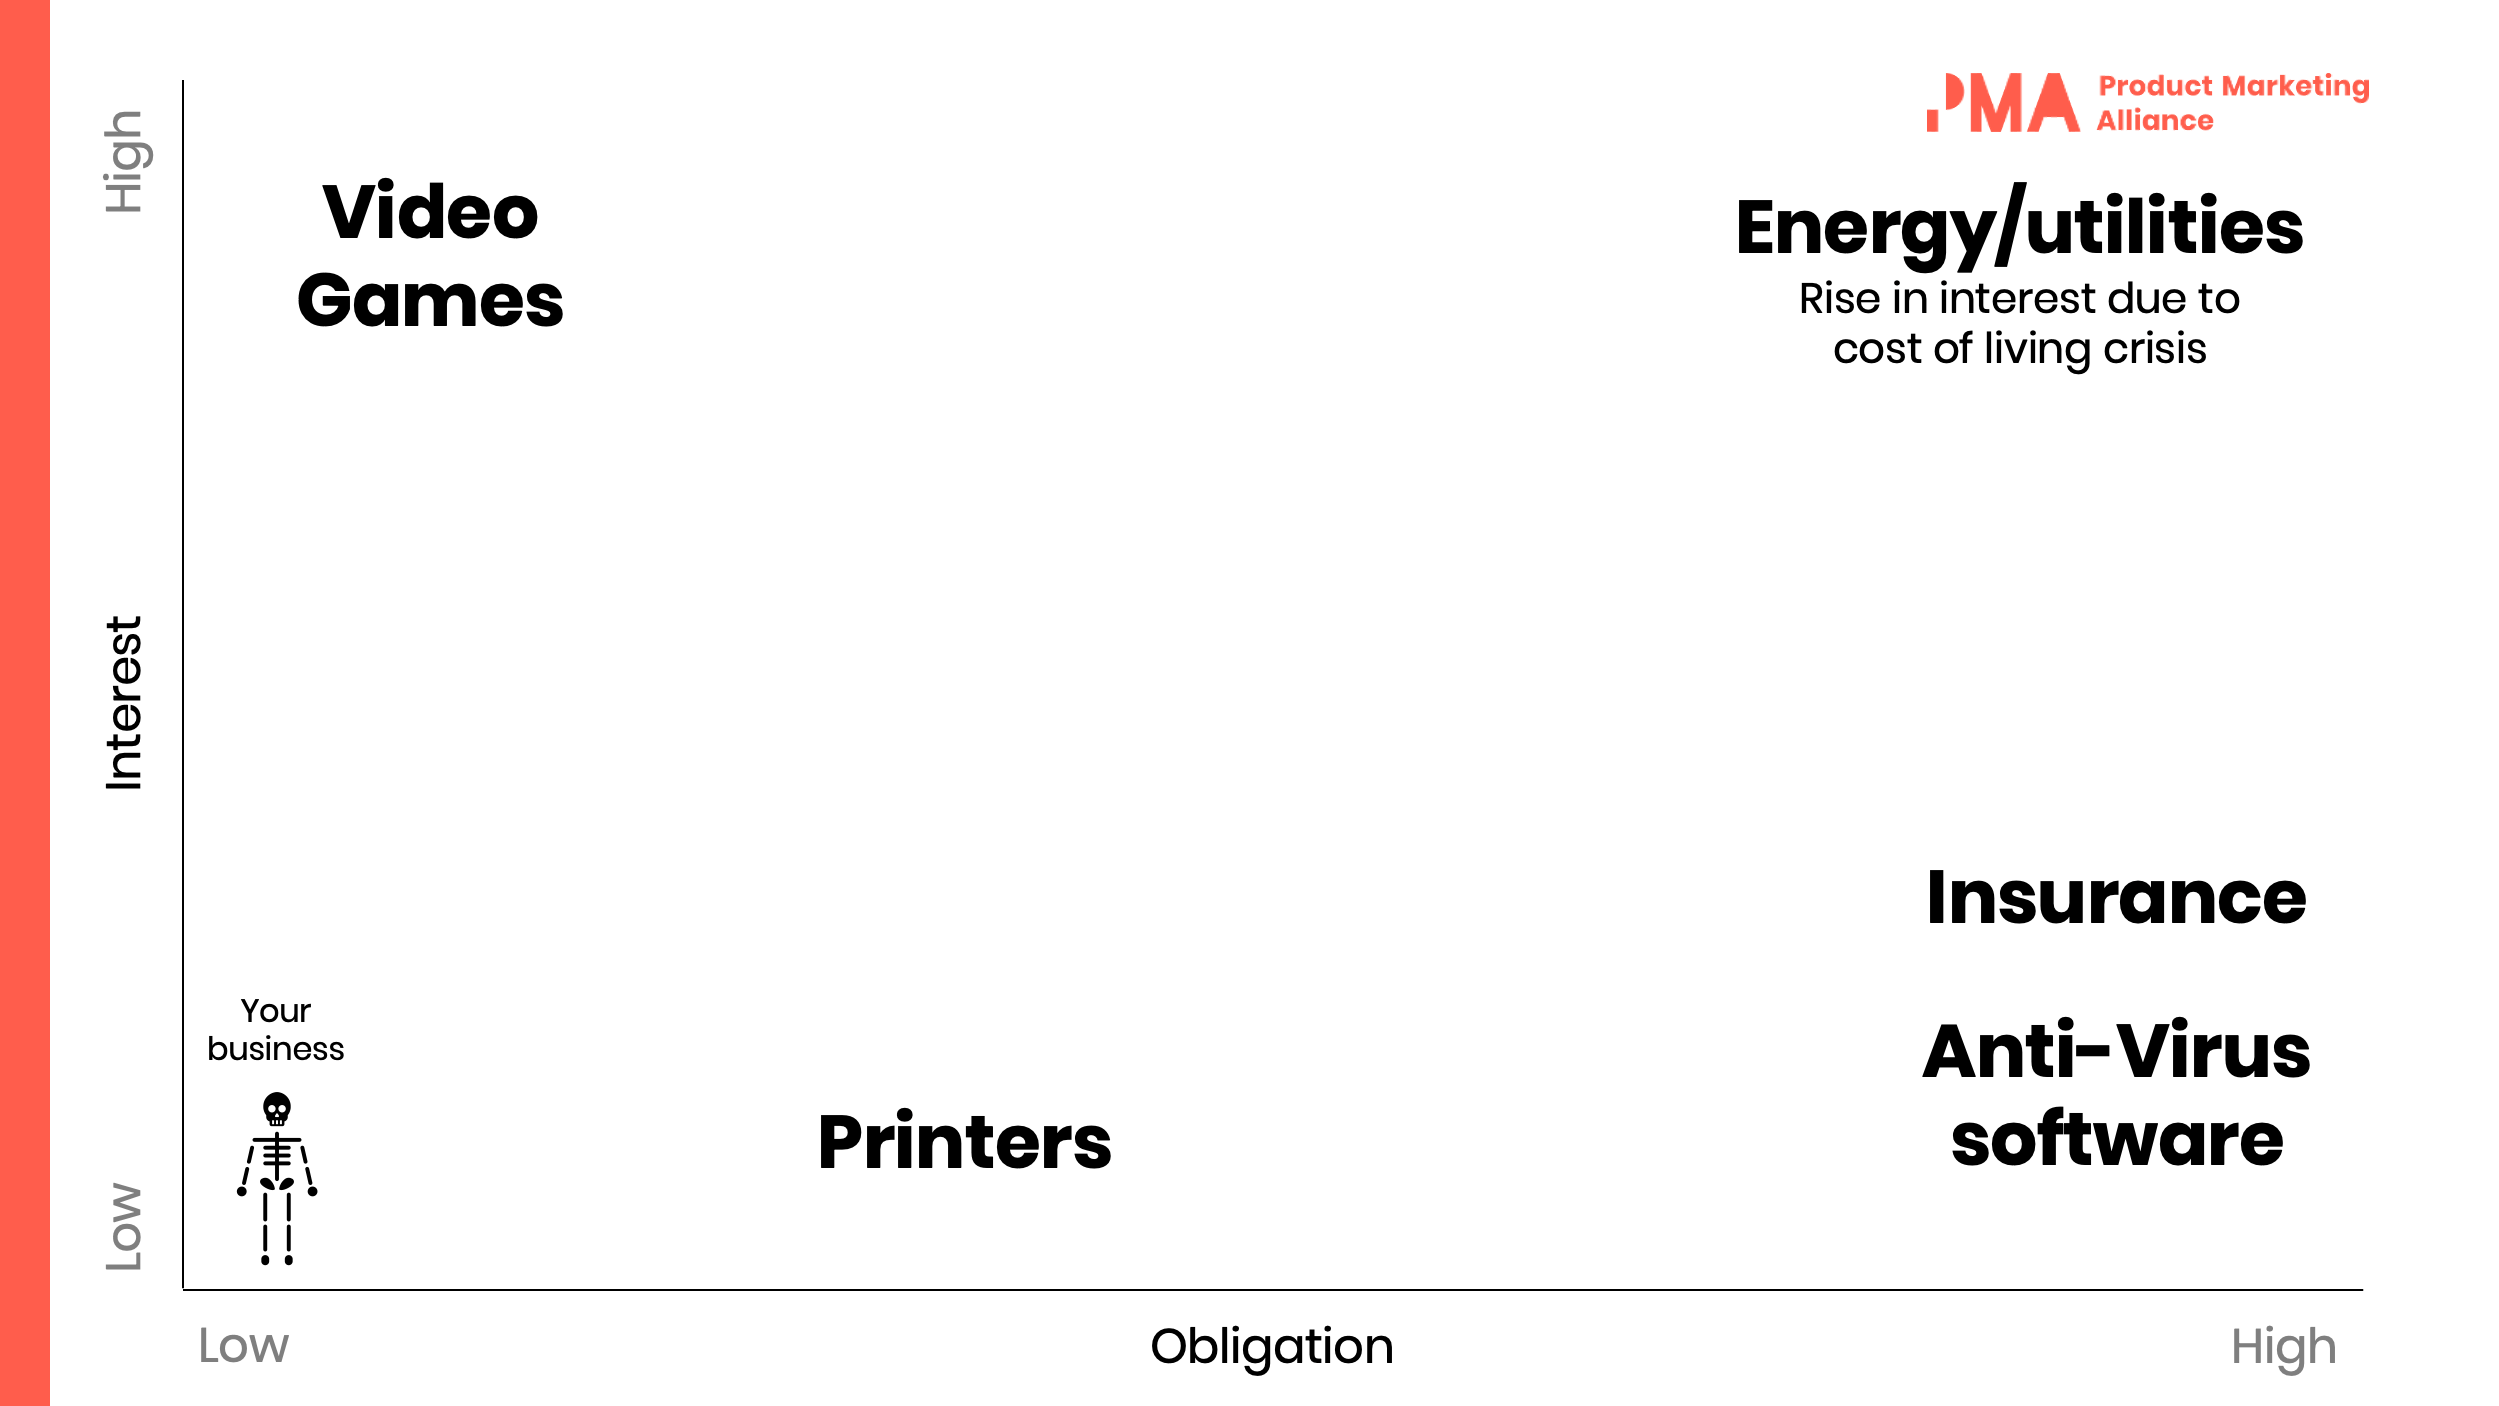 A graph with interest on the y axis, and obligation on the x axis. "Your business" is low interest, low obligation, video games is high interest, low obligation, printers is medium obligation, low interest, insurance and anti-virus software are high obligation low interest, and energy/utilities - rise in interest due to cost of living crisis, is high interest, high obligation. 